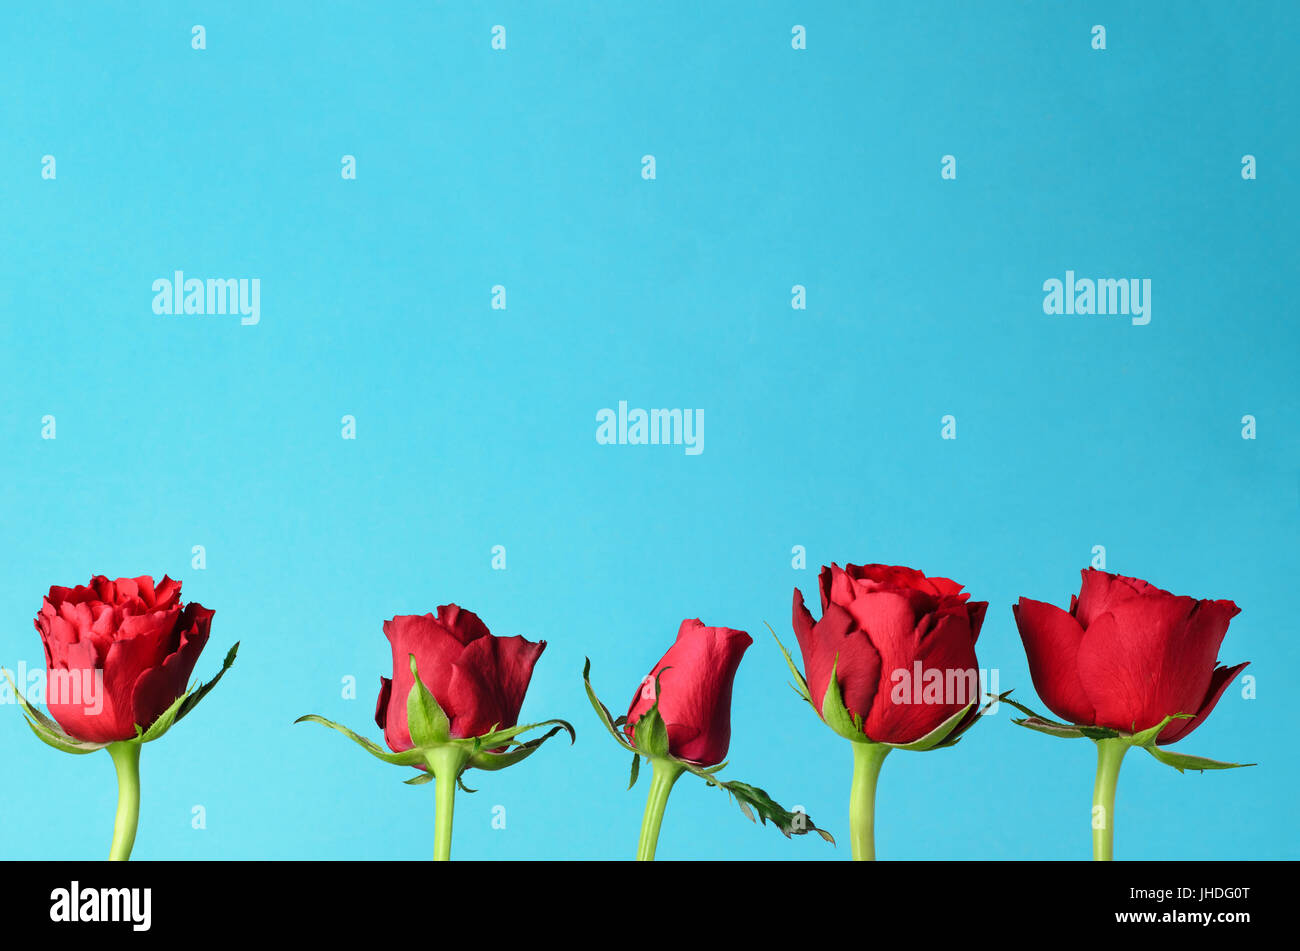 Five individual red roses, lined up in an upright row against a light, bright blue background. Stock Photo